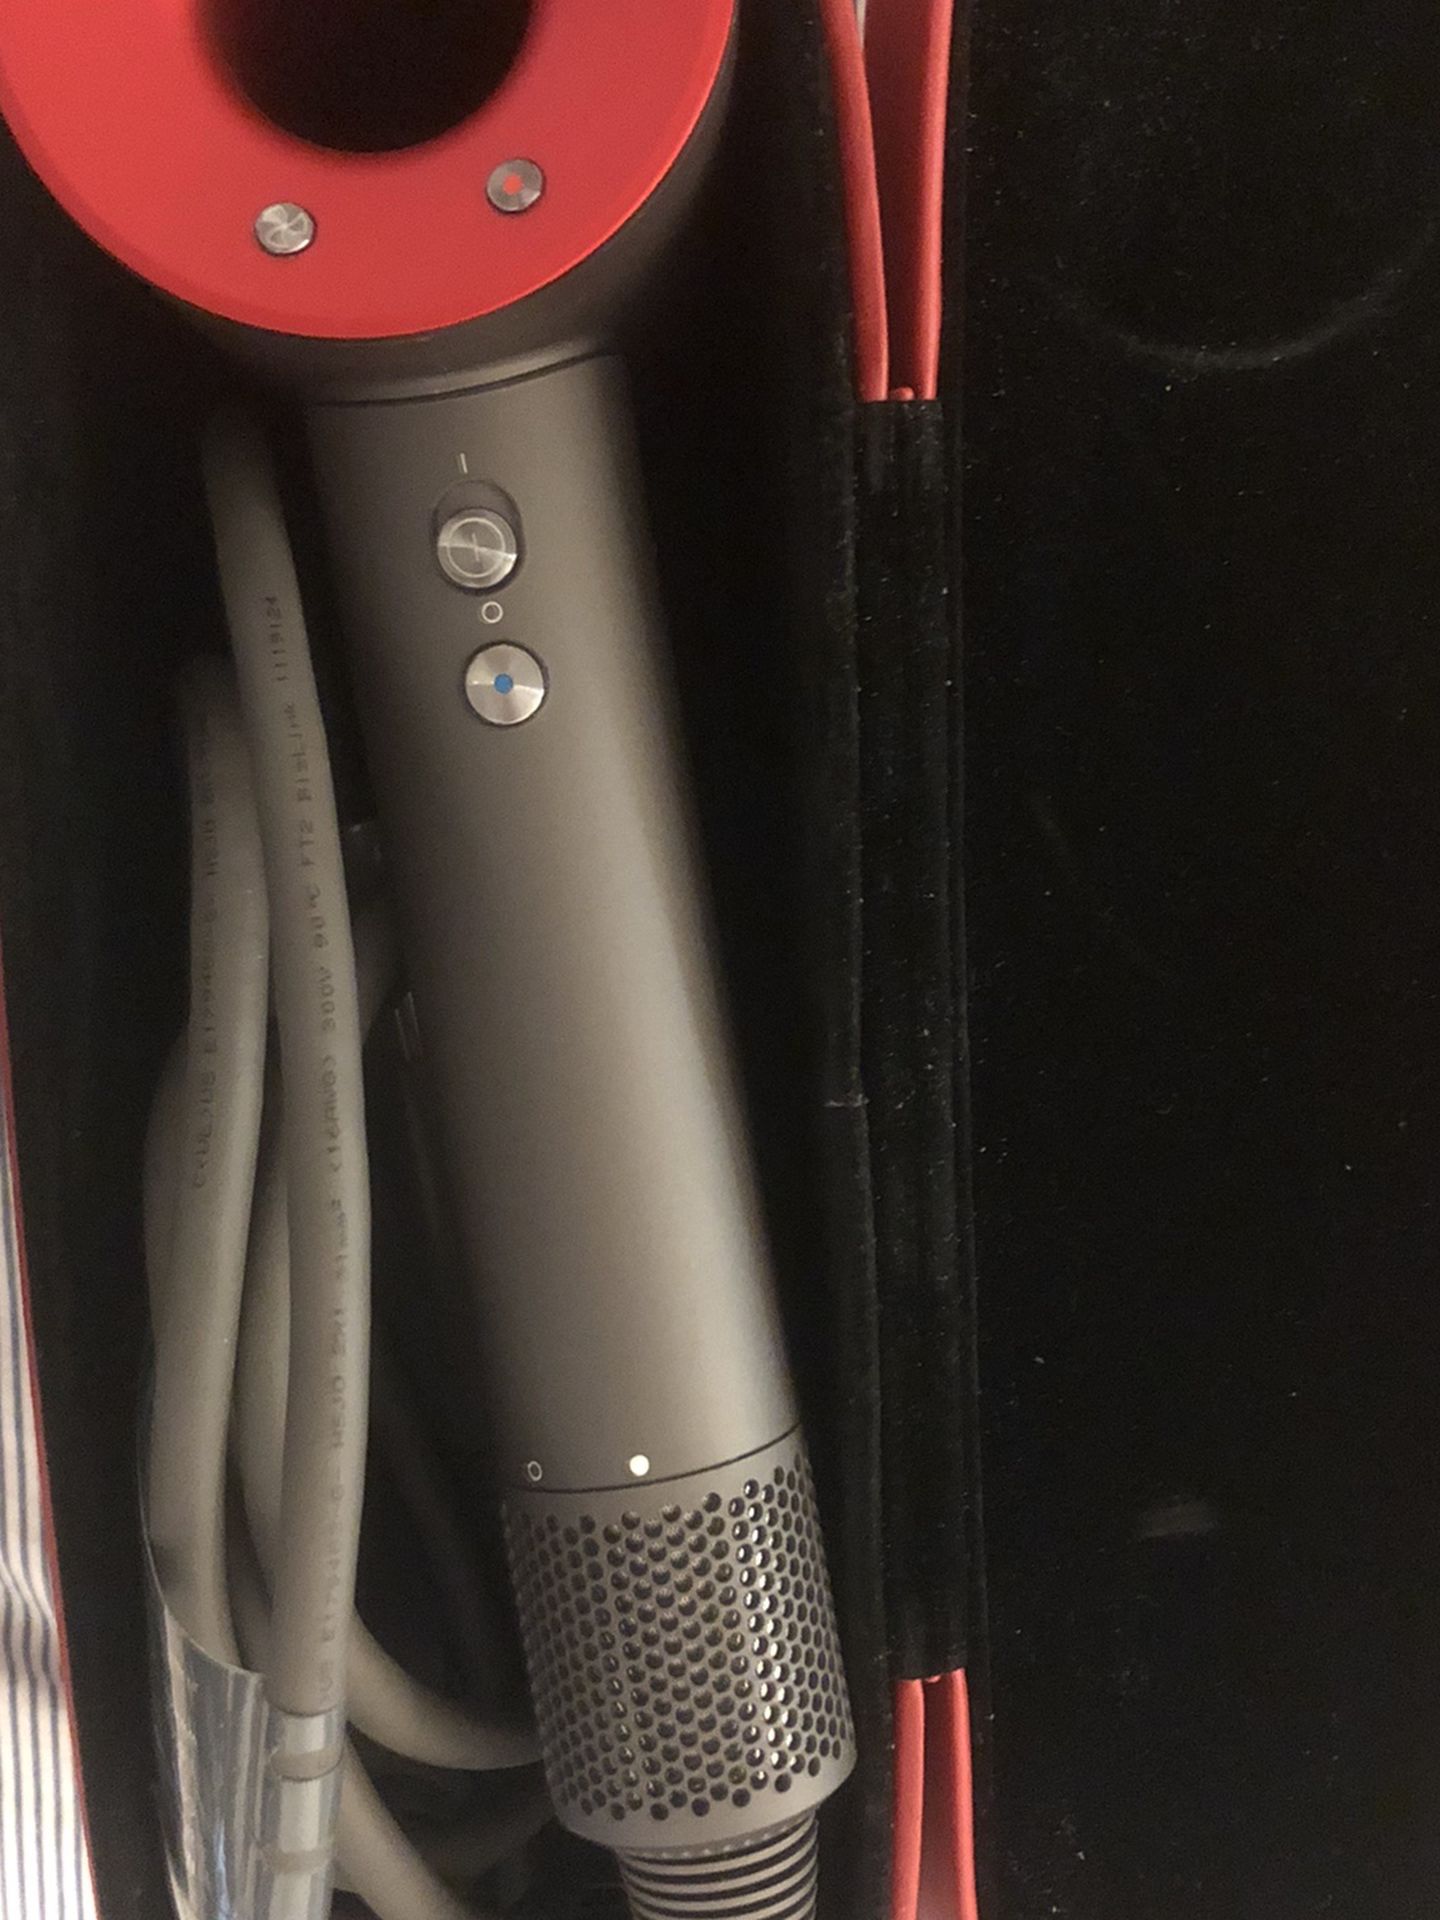 Dyson Hair Dryer With Leather Box And Warranty Like New